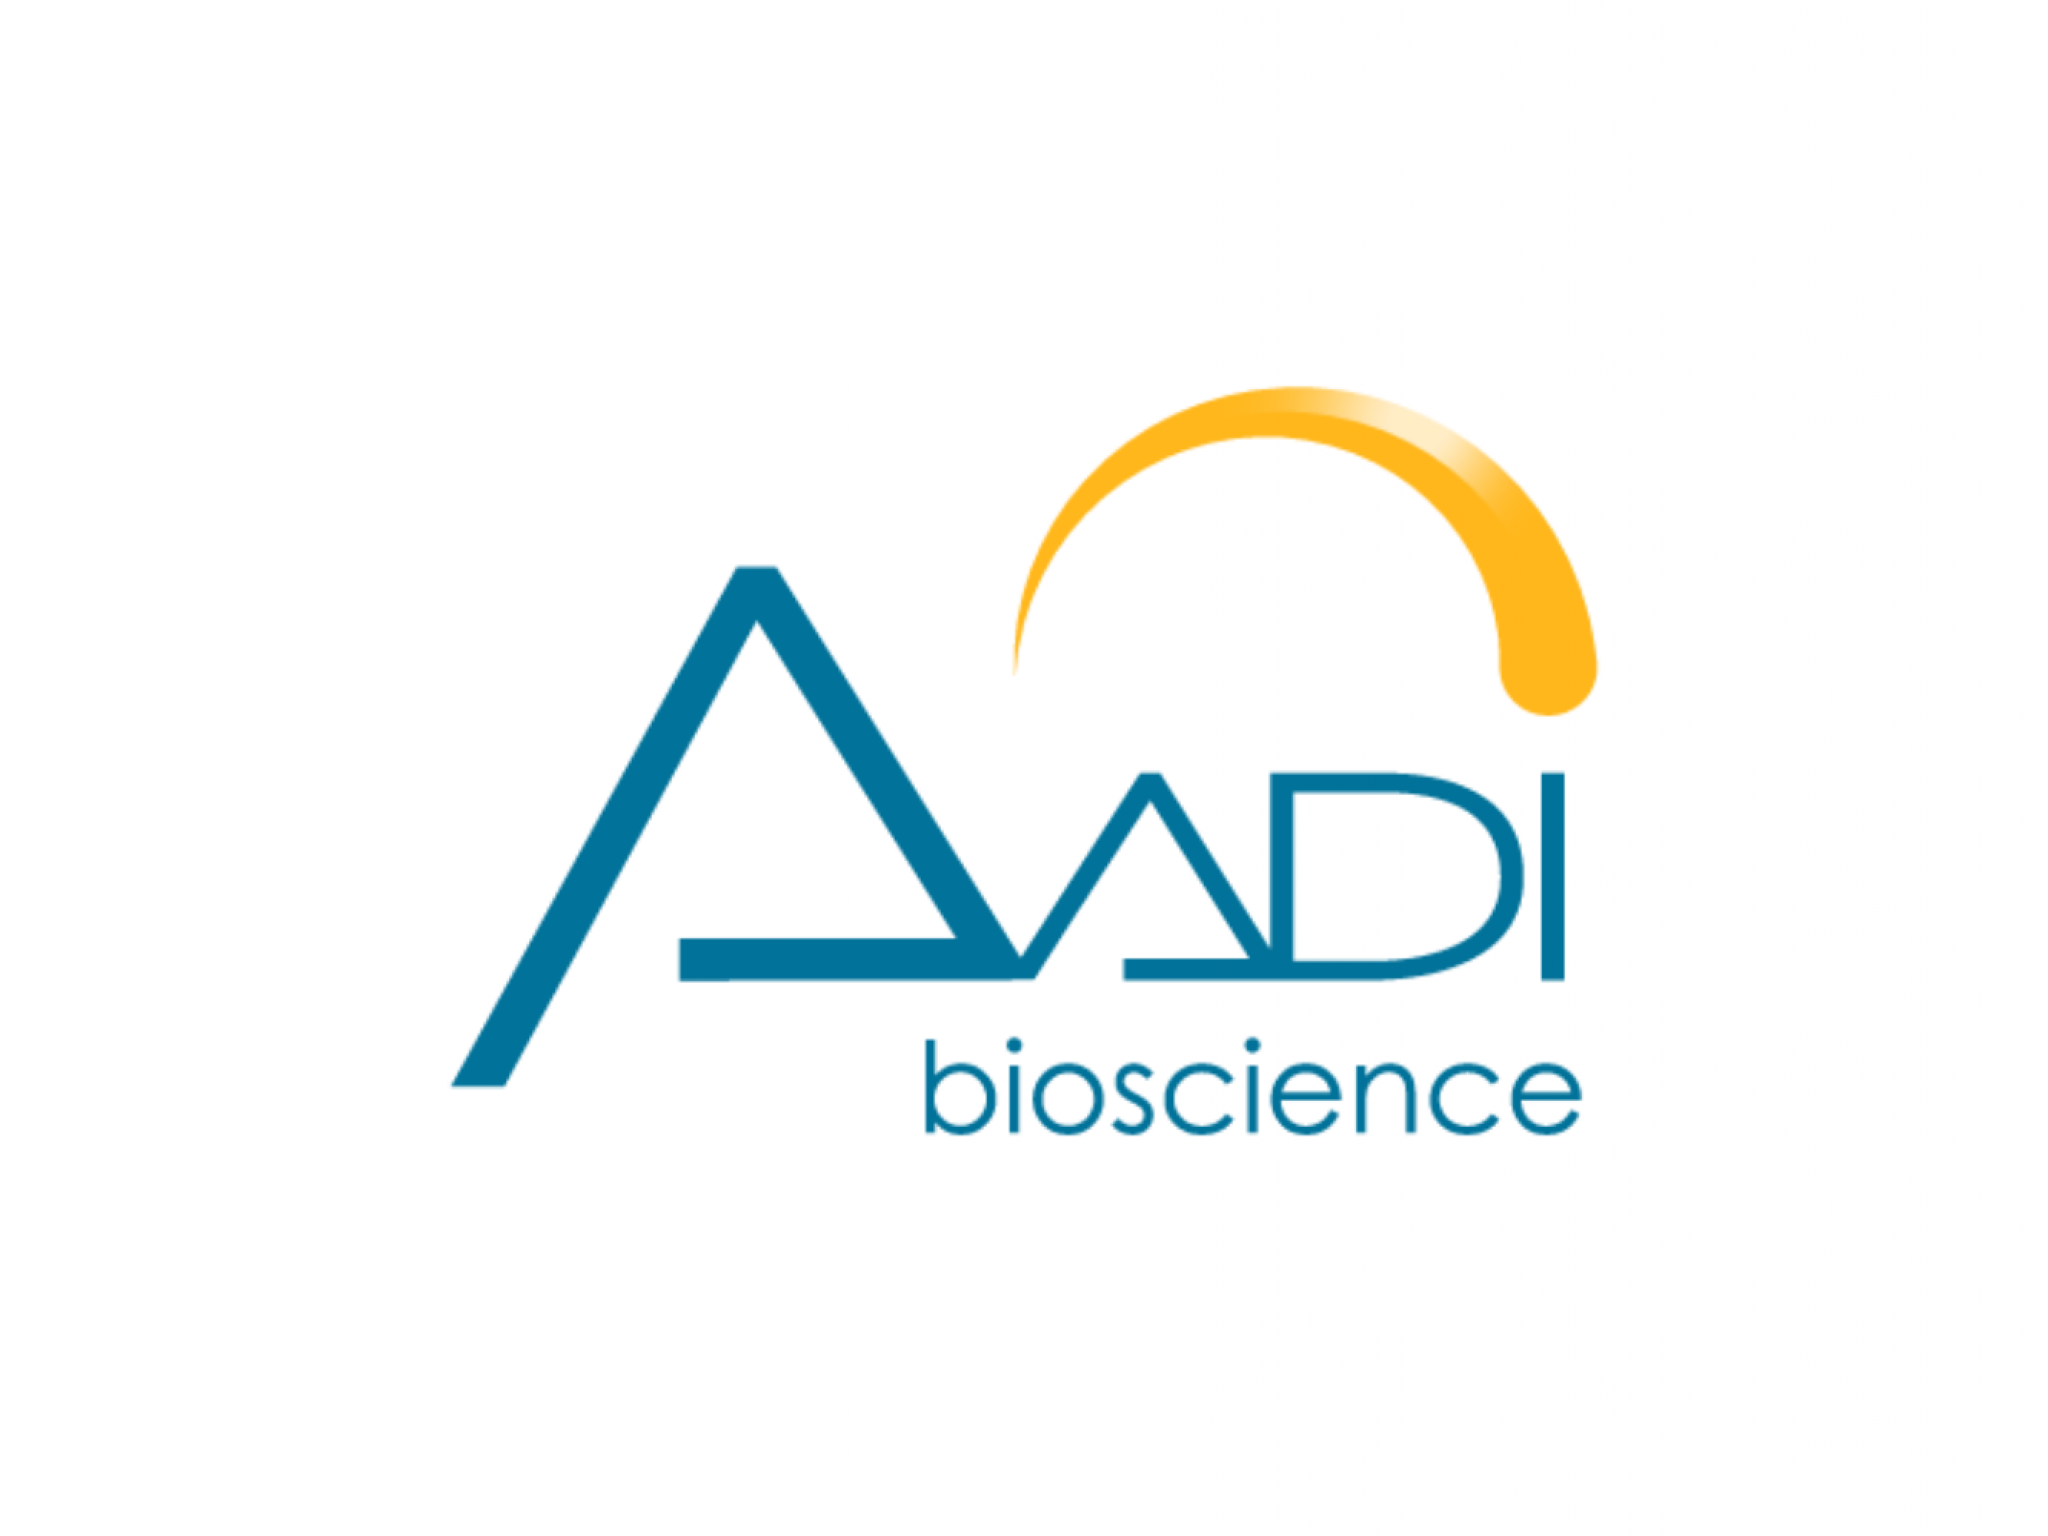  cancer-player-aadi-bioscience-downgraded-analyst-highlights-worse-than-expected-response-rates 